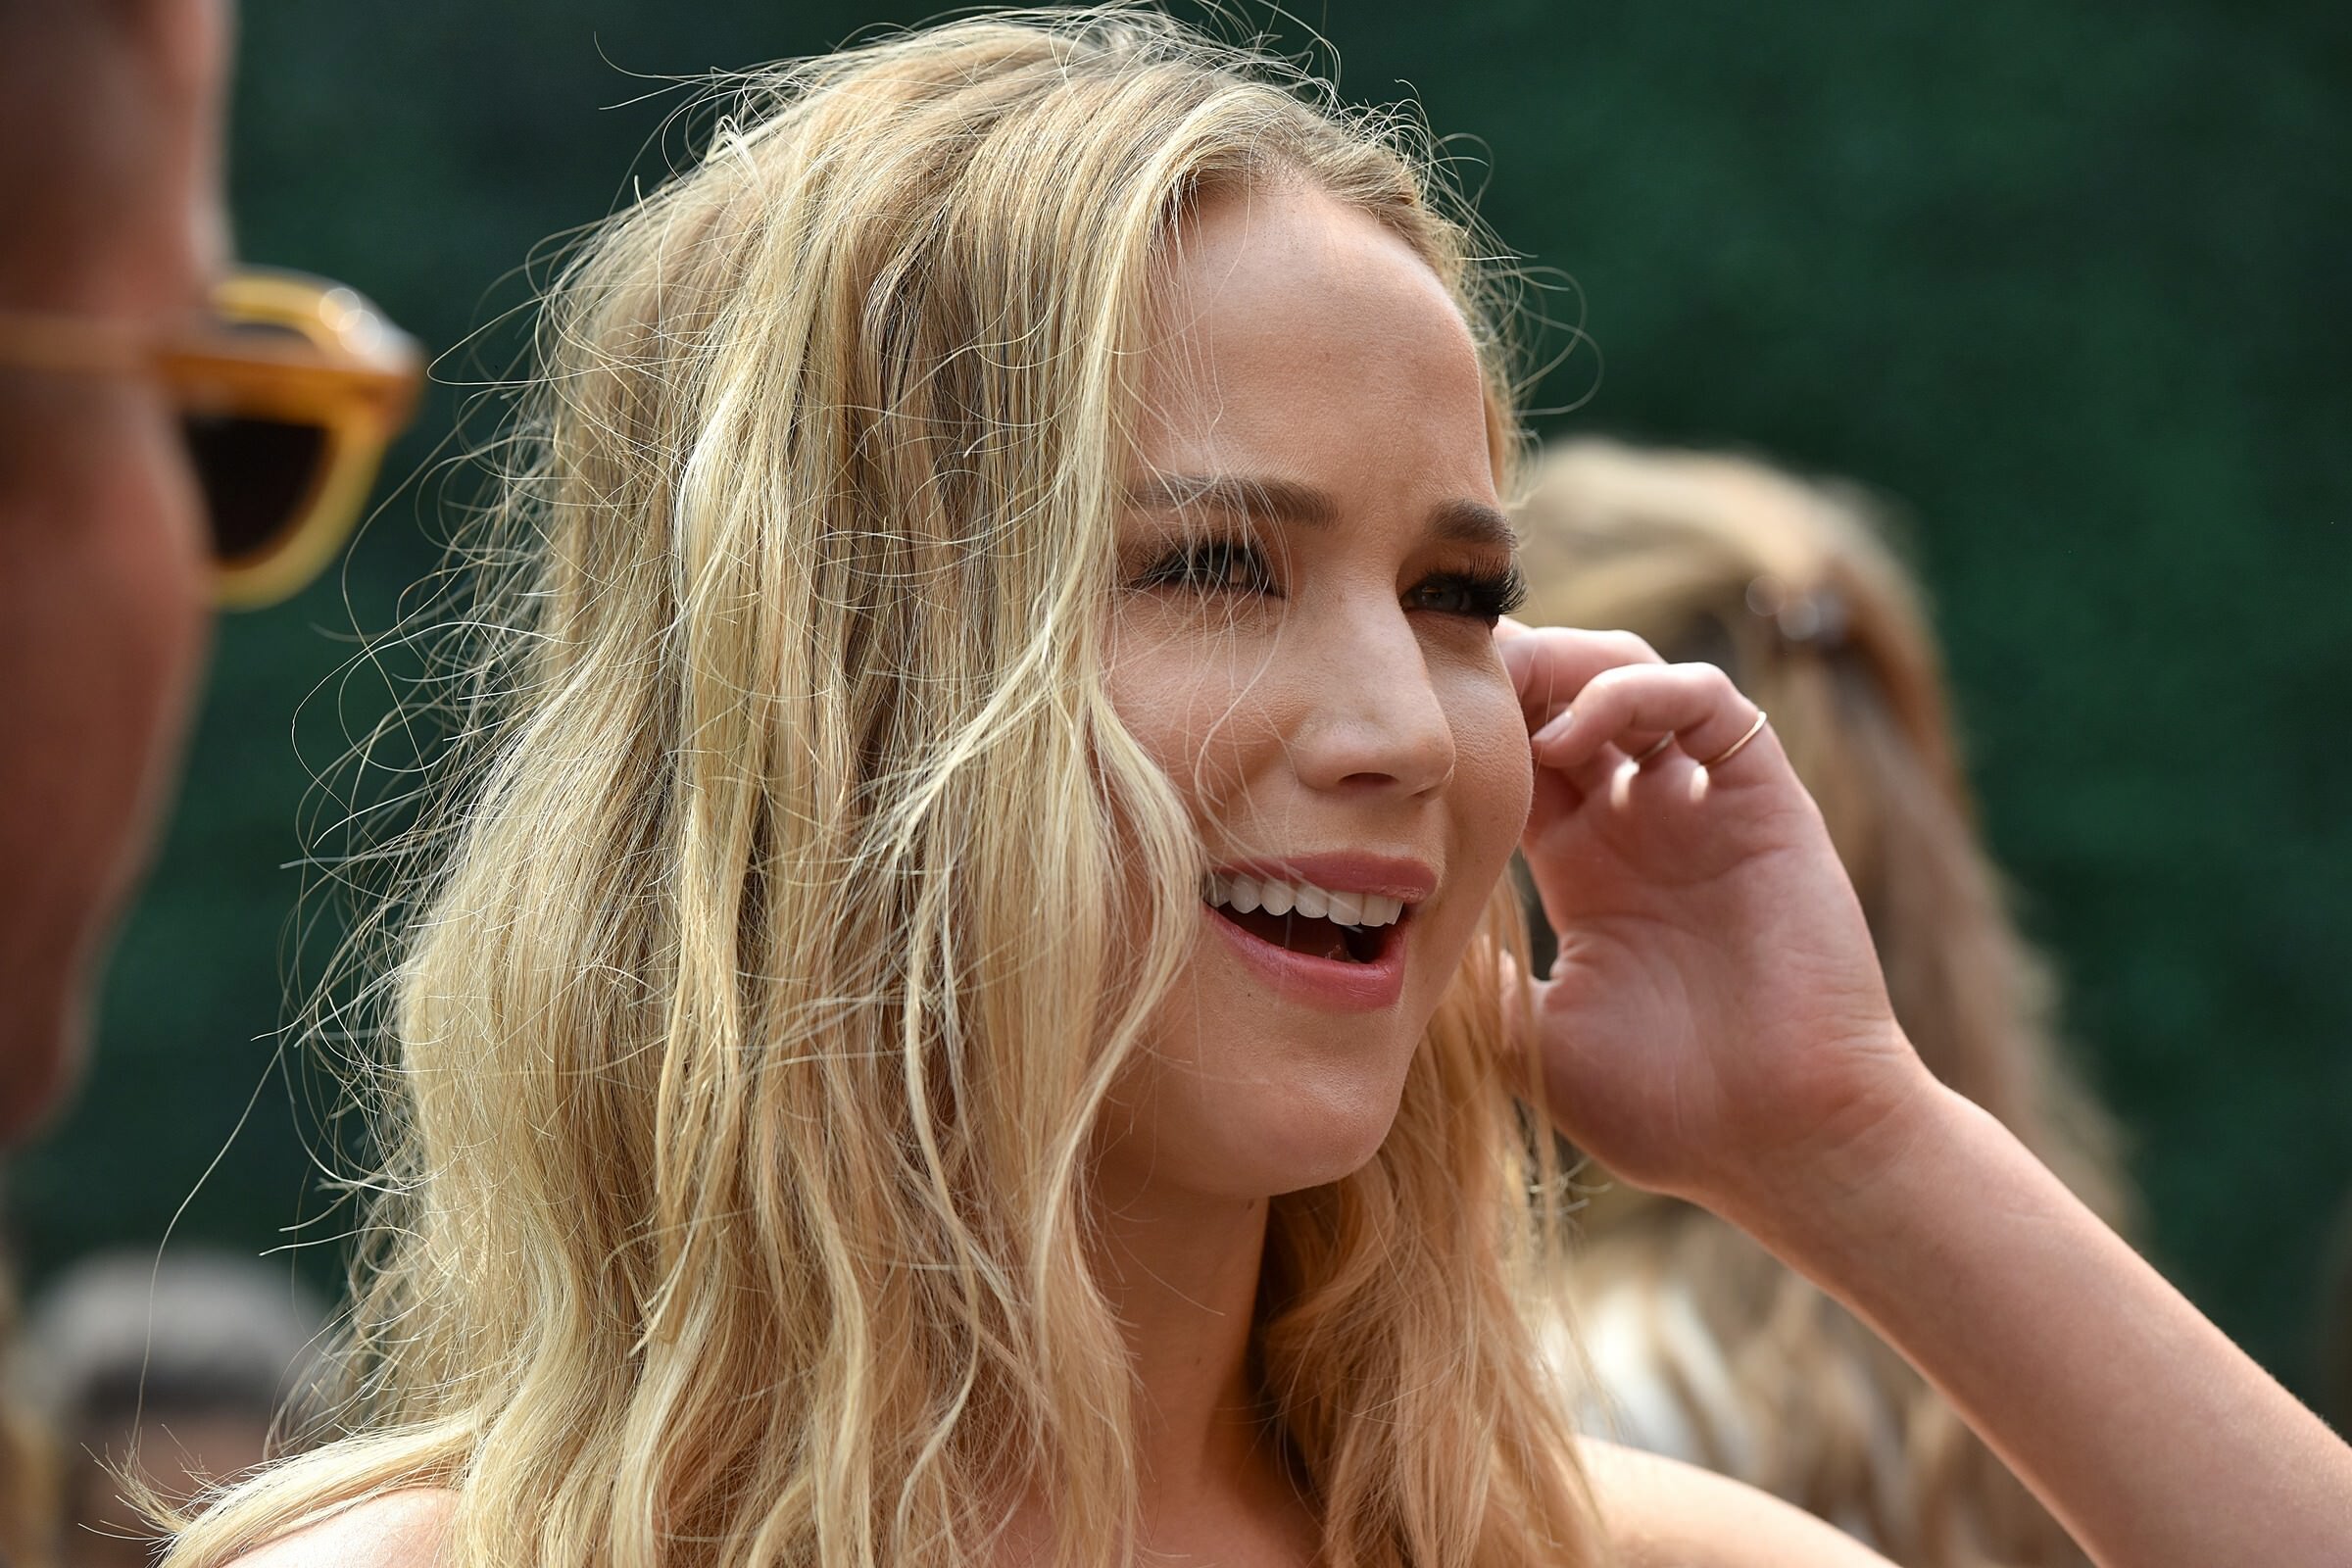 Jennifer Lawrence at 12th Annual Veuve Clicquot Polo Classic Liberty State Park